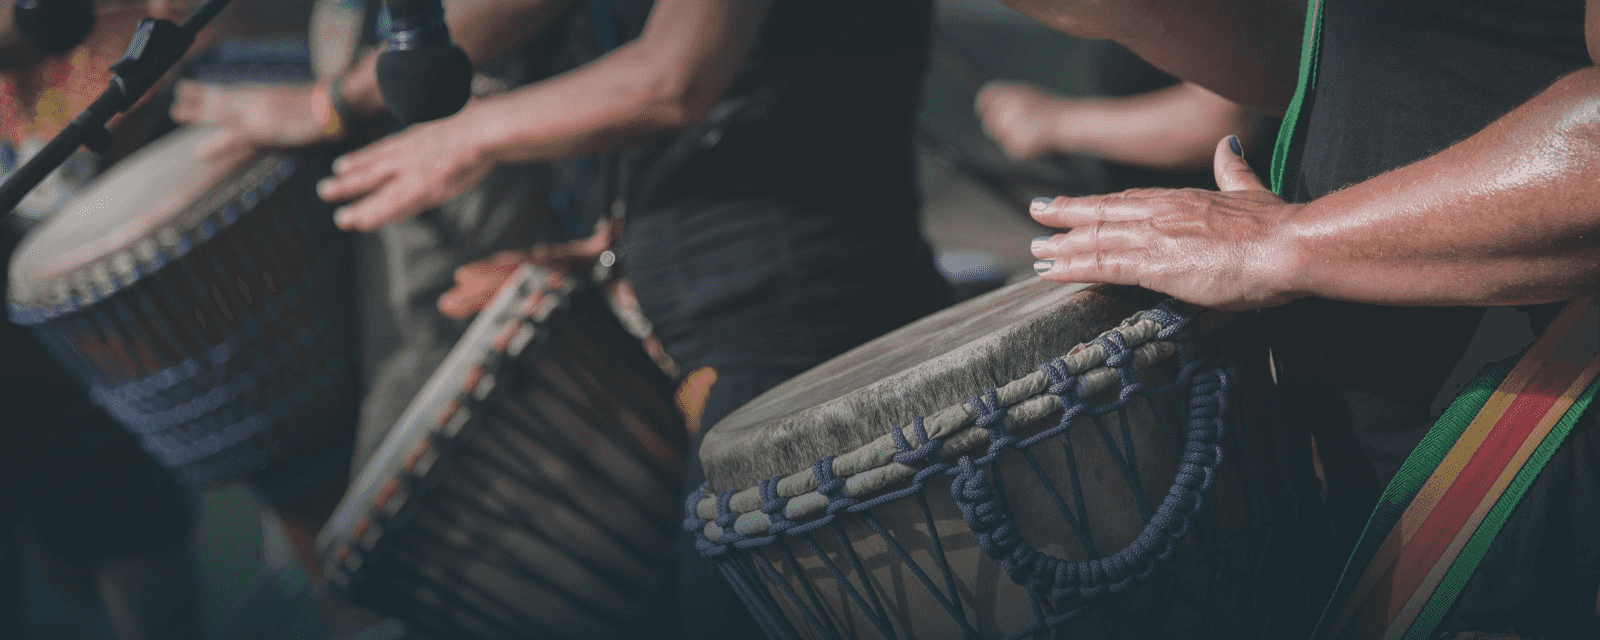 Percussions, drums and Rhythm